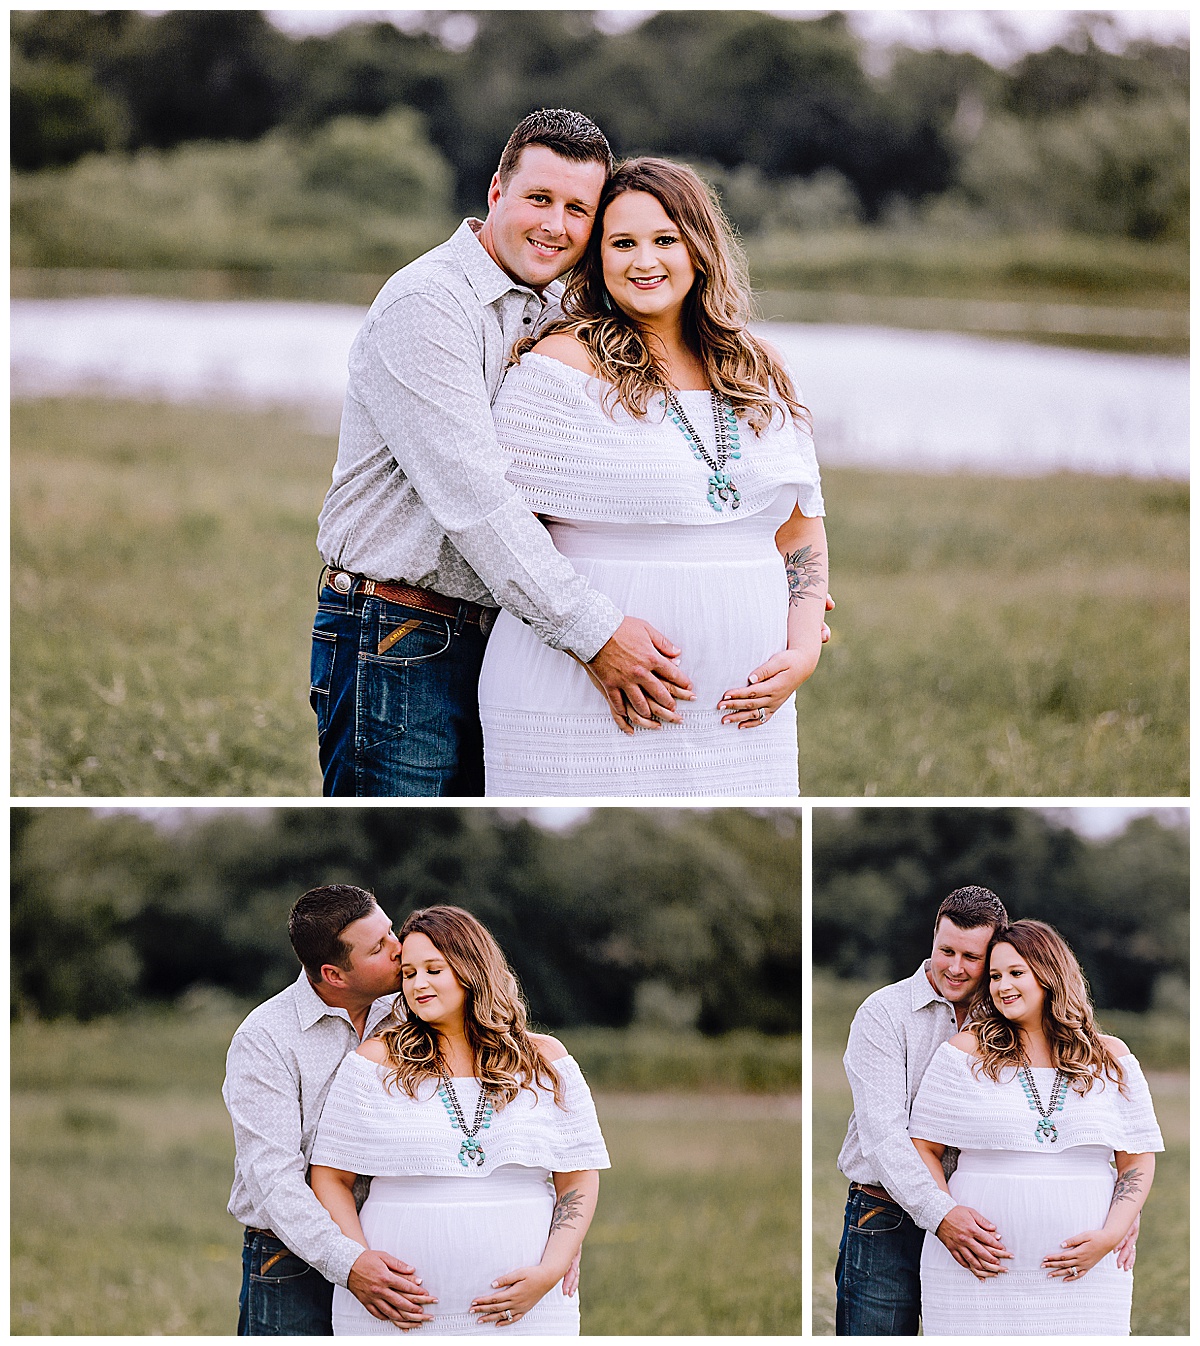 Rustic-Maternity-Session-Texas-Sunset-Carly-Barton-Photography_0071.jpg